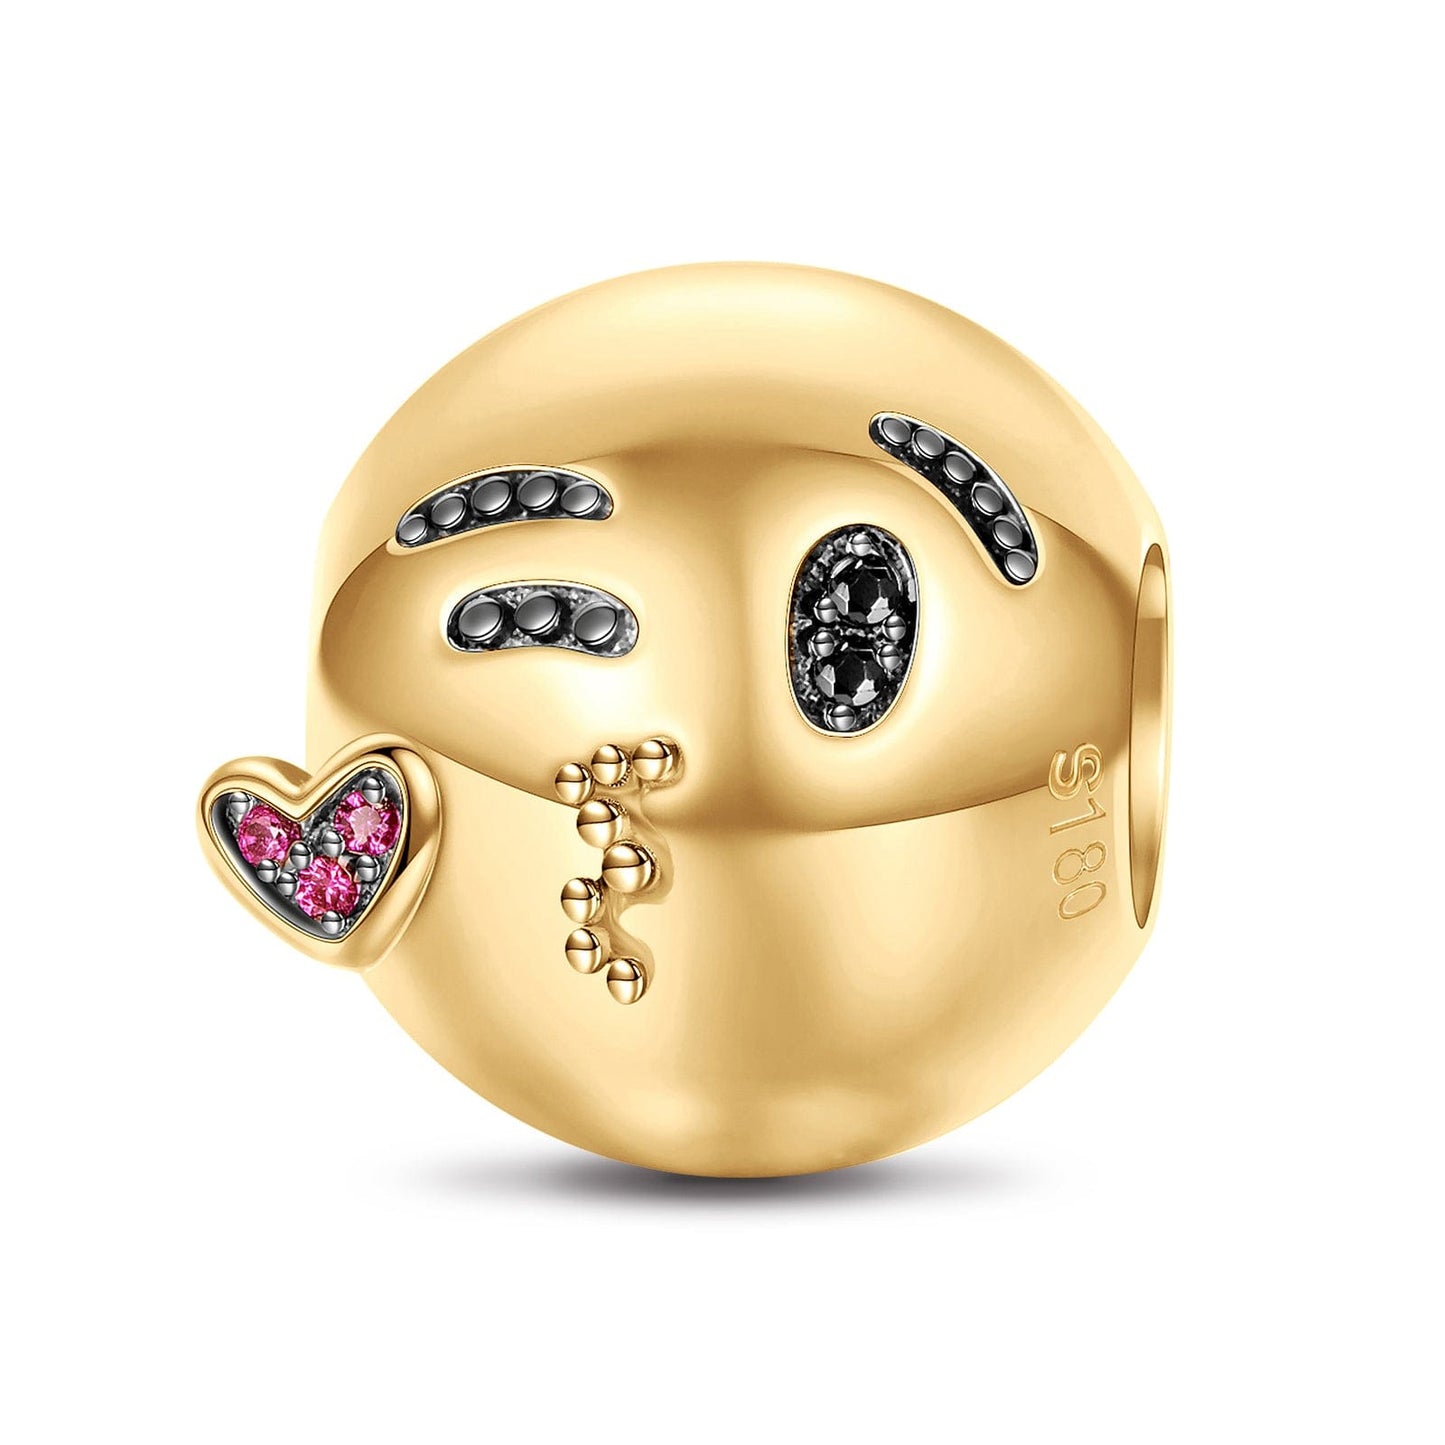 Face Blowing Kiss Emoji Tarnish-resistant Silver Charms In 14K Gold Plated